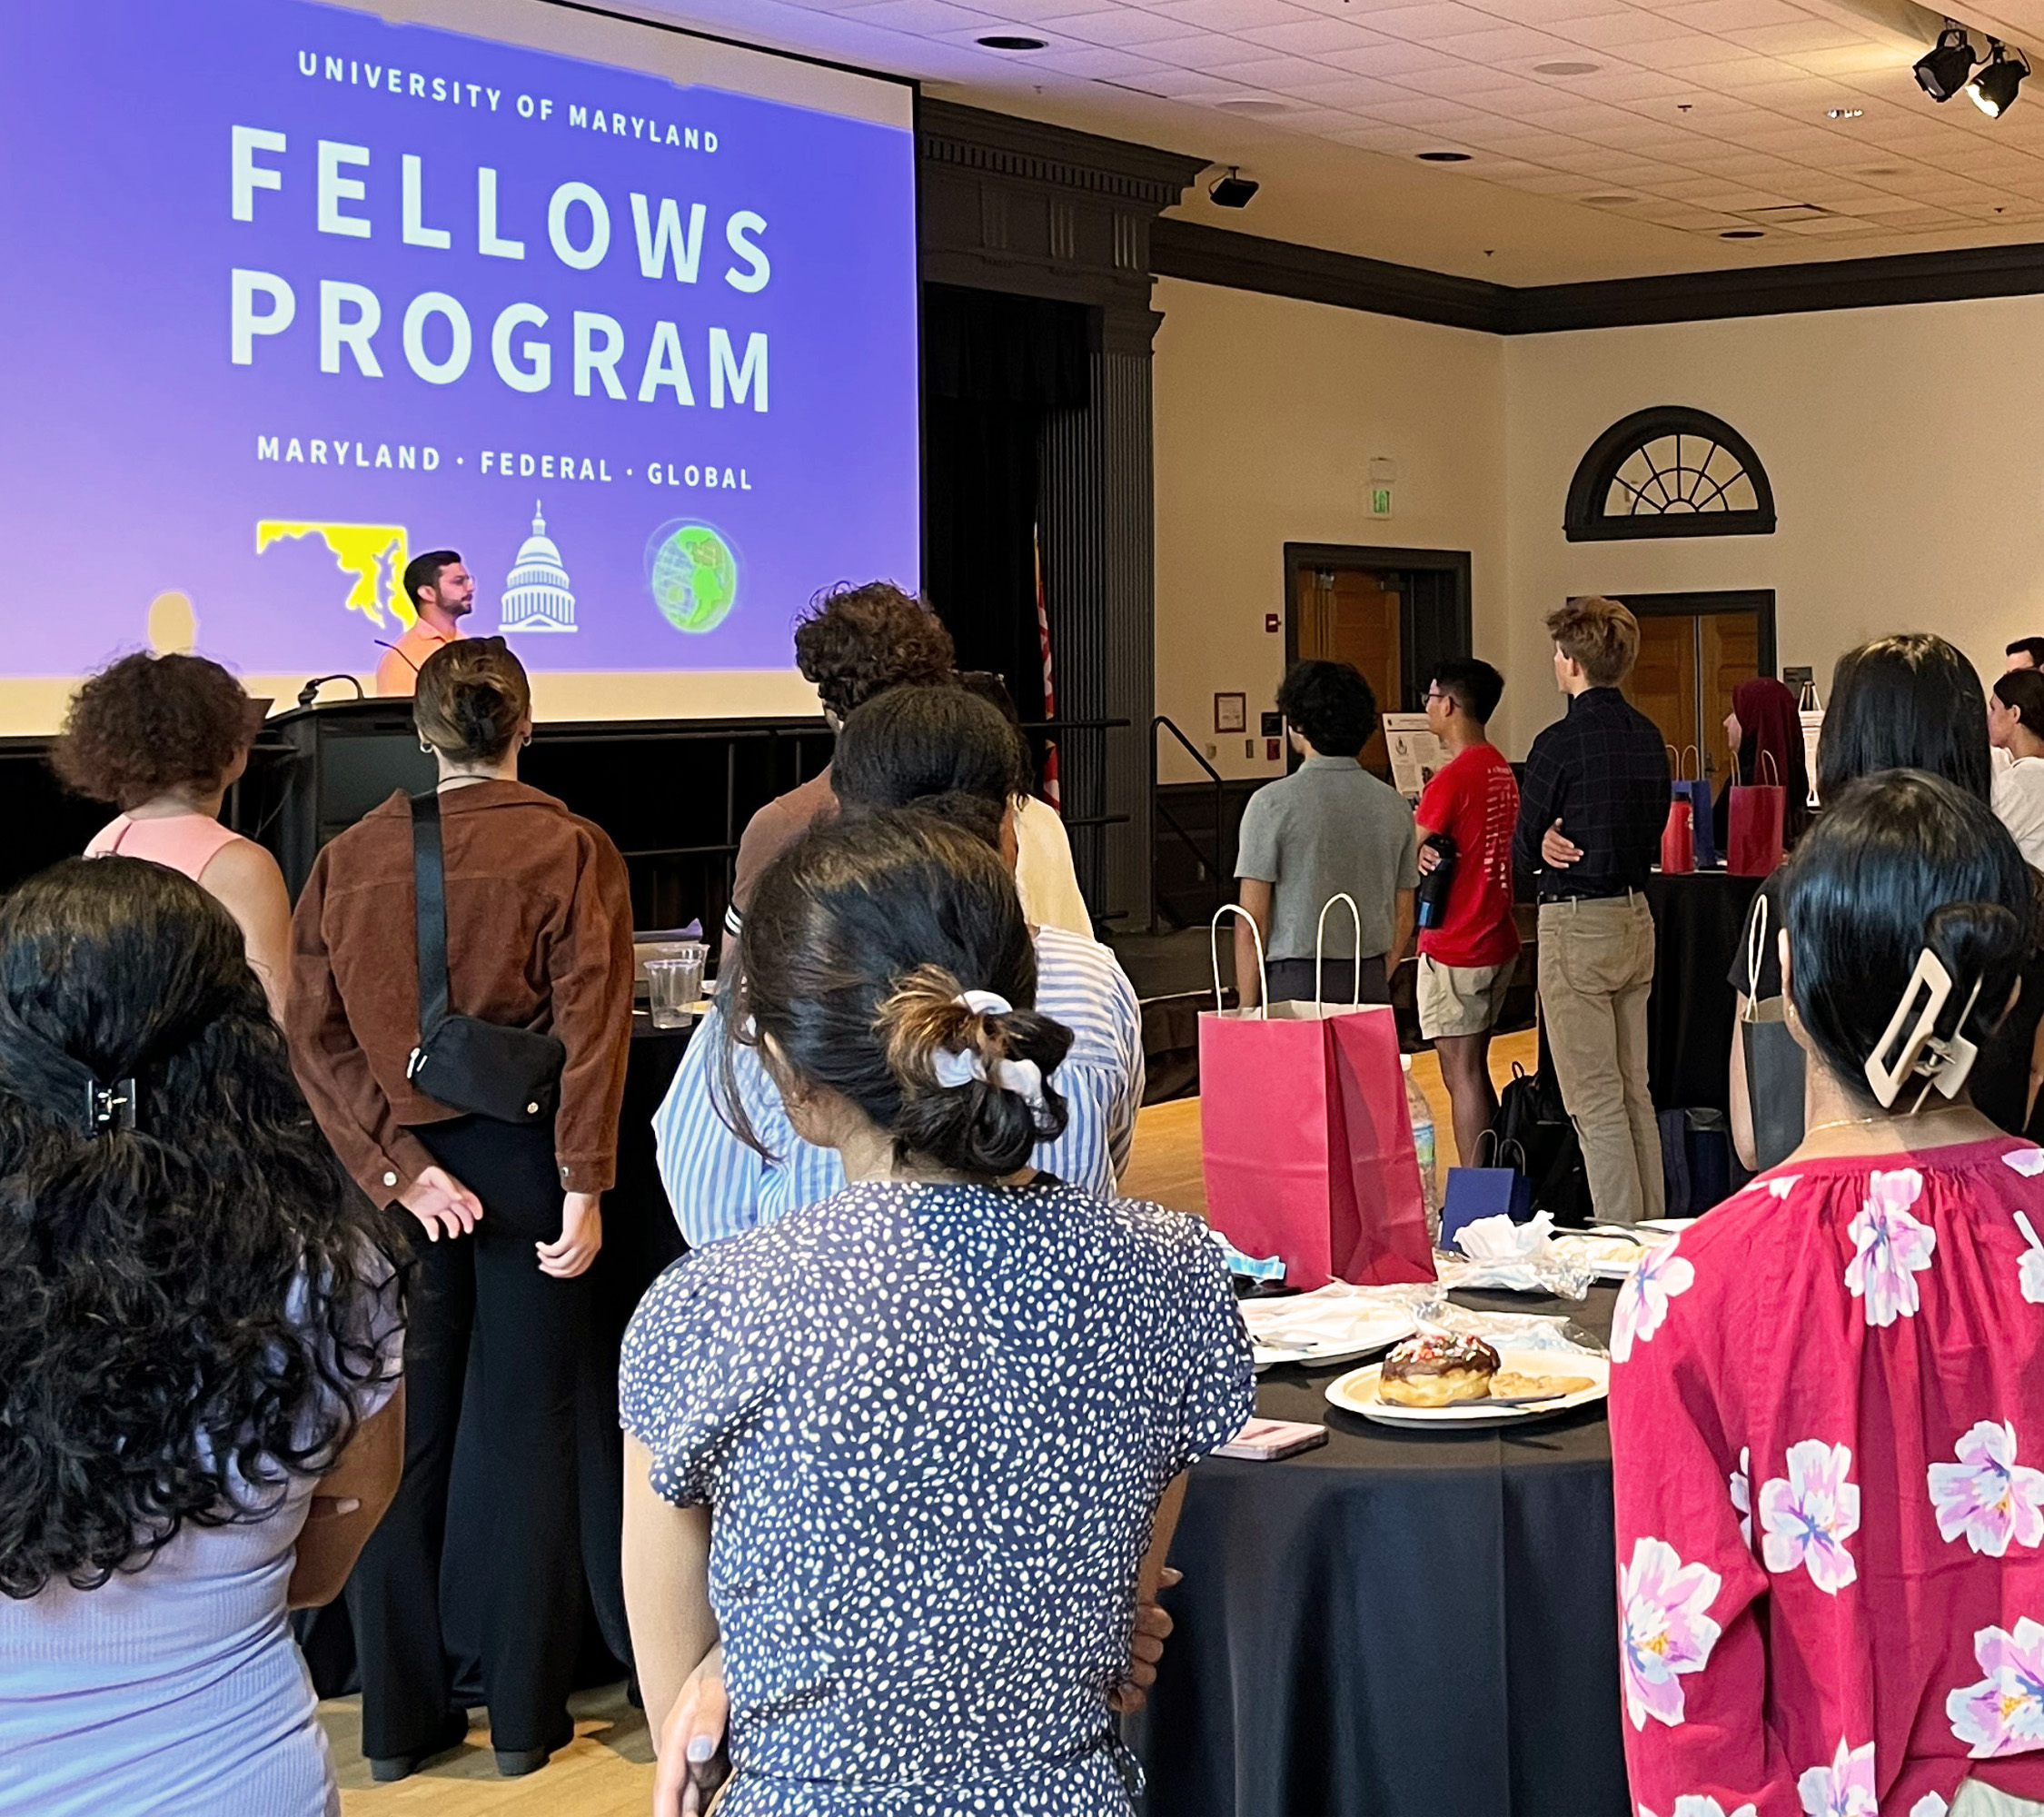 Many diverse new Fellows students in a ballroom listning to Jonathan Lee speaking on stage in front of the UMD Fellows Program Logo